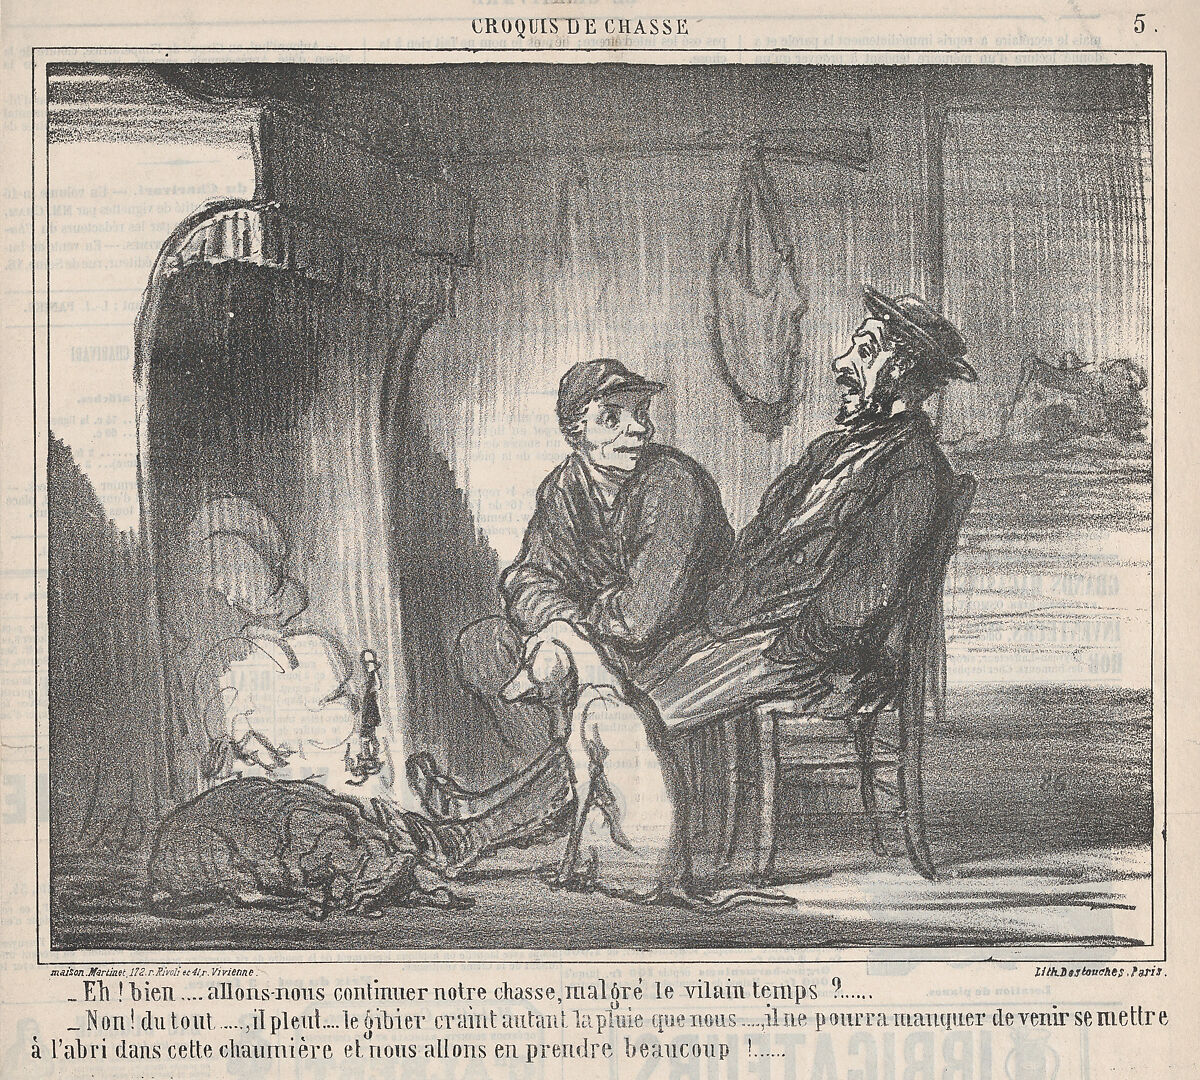 Eh! bien.... allons-nous continuer notre chasse..., from Croquis de Chasse, published in Le Charivari, October 14, 1859, Honoré Daumier (French, Marseilles 1808–1879 Valmondois), Lithograph on newsprint; second state (Delteil) 